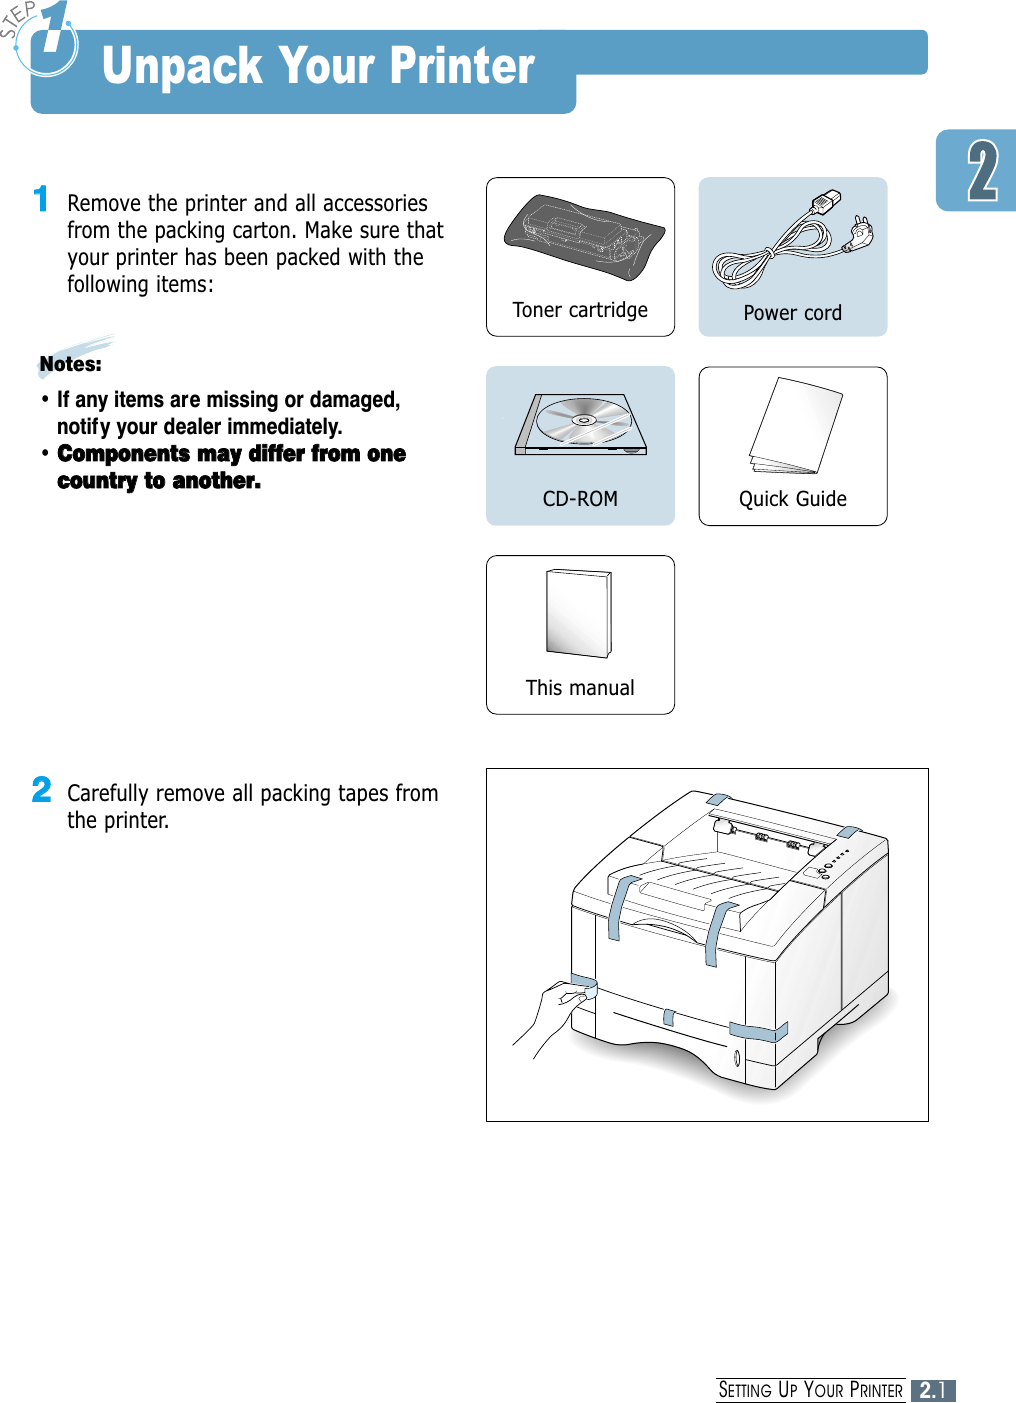 2.1SETTING UPYOUR PRINTERUnpack Your Printer11Remove the printer and all accessoriesfrom the packing carton. Make sure thatyour printer has been packed with thefollowing items:Notes:• If any items are missing or damaged,notify your dealer immediately.• CCoommppoonneennttss  mmaayy  ddiiffffeerr  ffrroomm  oonneeccoouunnttrryy  ttoo  aannootthheerr..Toner cartridge Power cordQuick GuideCD-ROMThis manual22Carefully remove all packing tapes fromthe printer. 